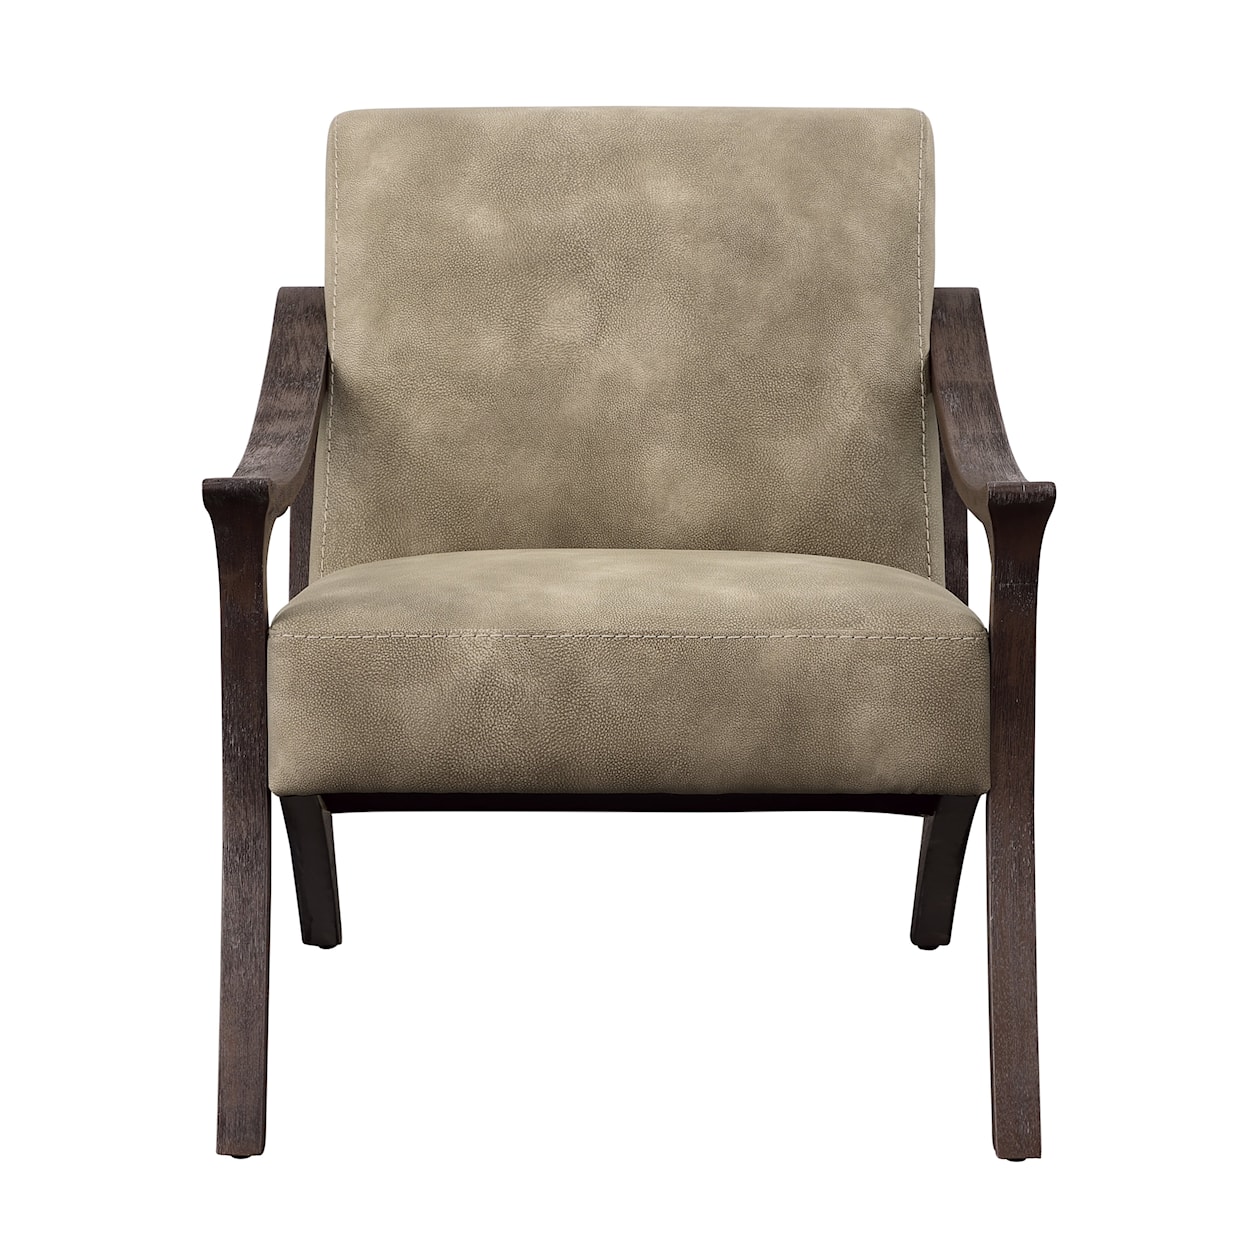 C2C Coast to Coast Imports Accent Chairs